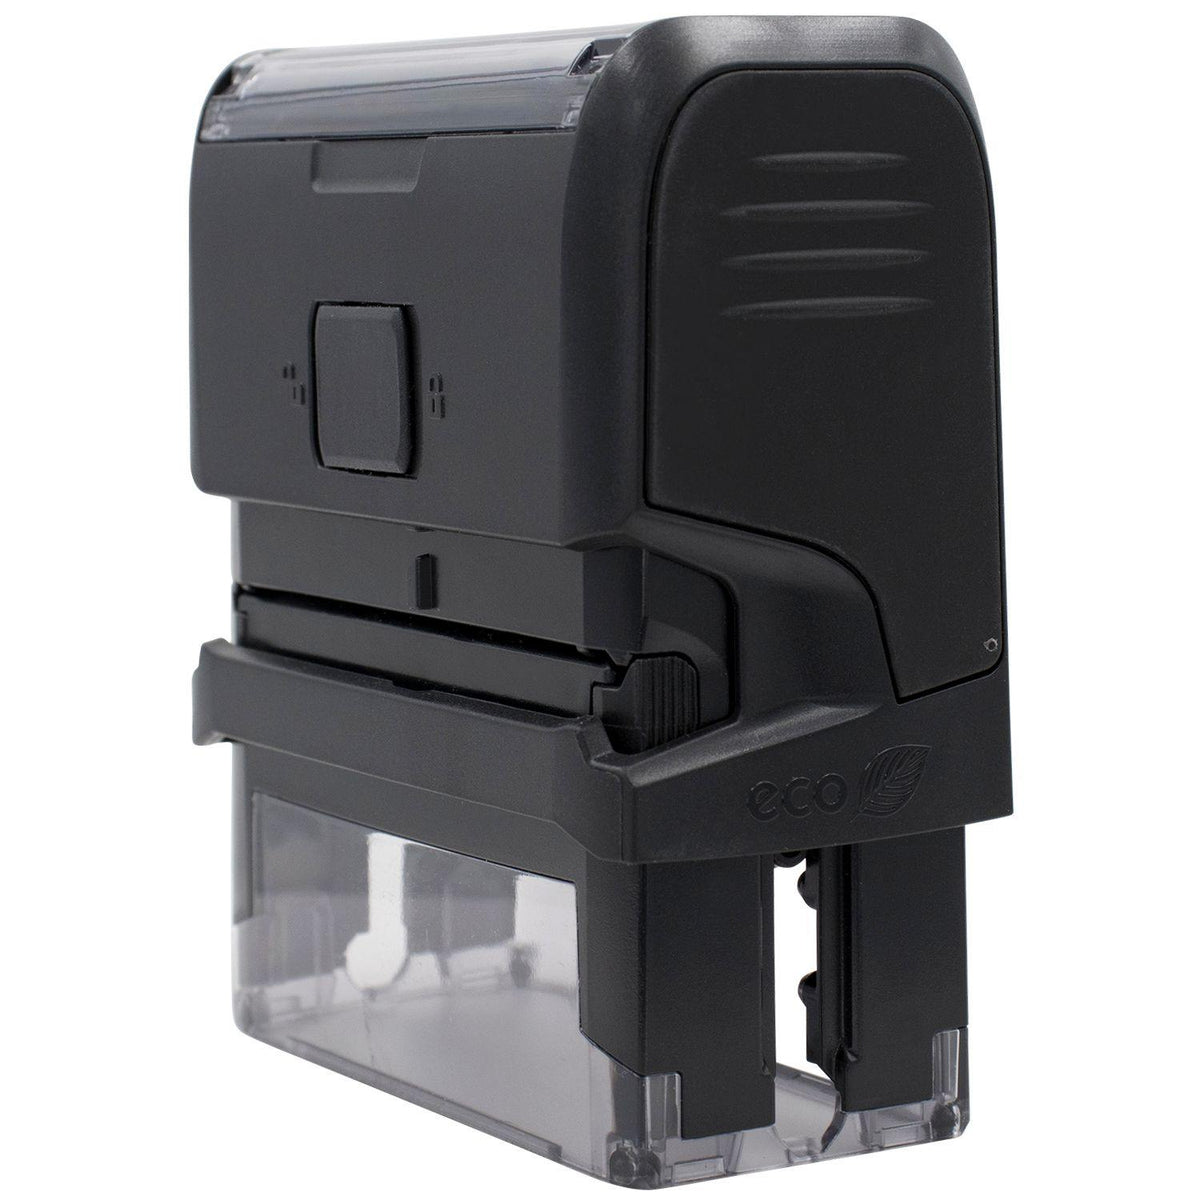 Large Self Inking Credit Stamp - Engineer Seal Stamps - Brand_Trodat, Impression Size_Large, Stamp Type_Self-Inking Stamp, Type of Use_Finance